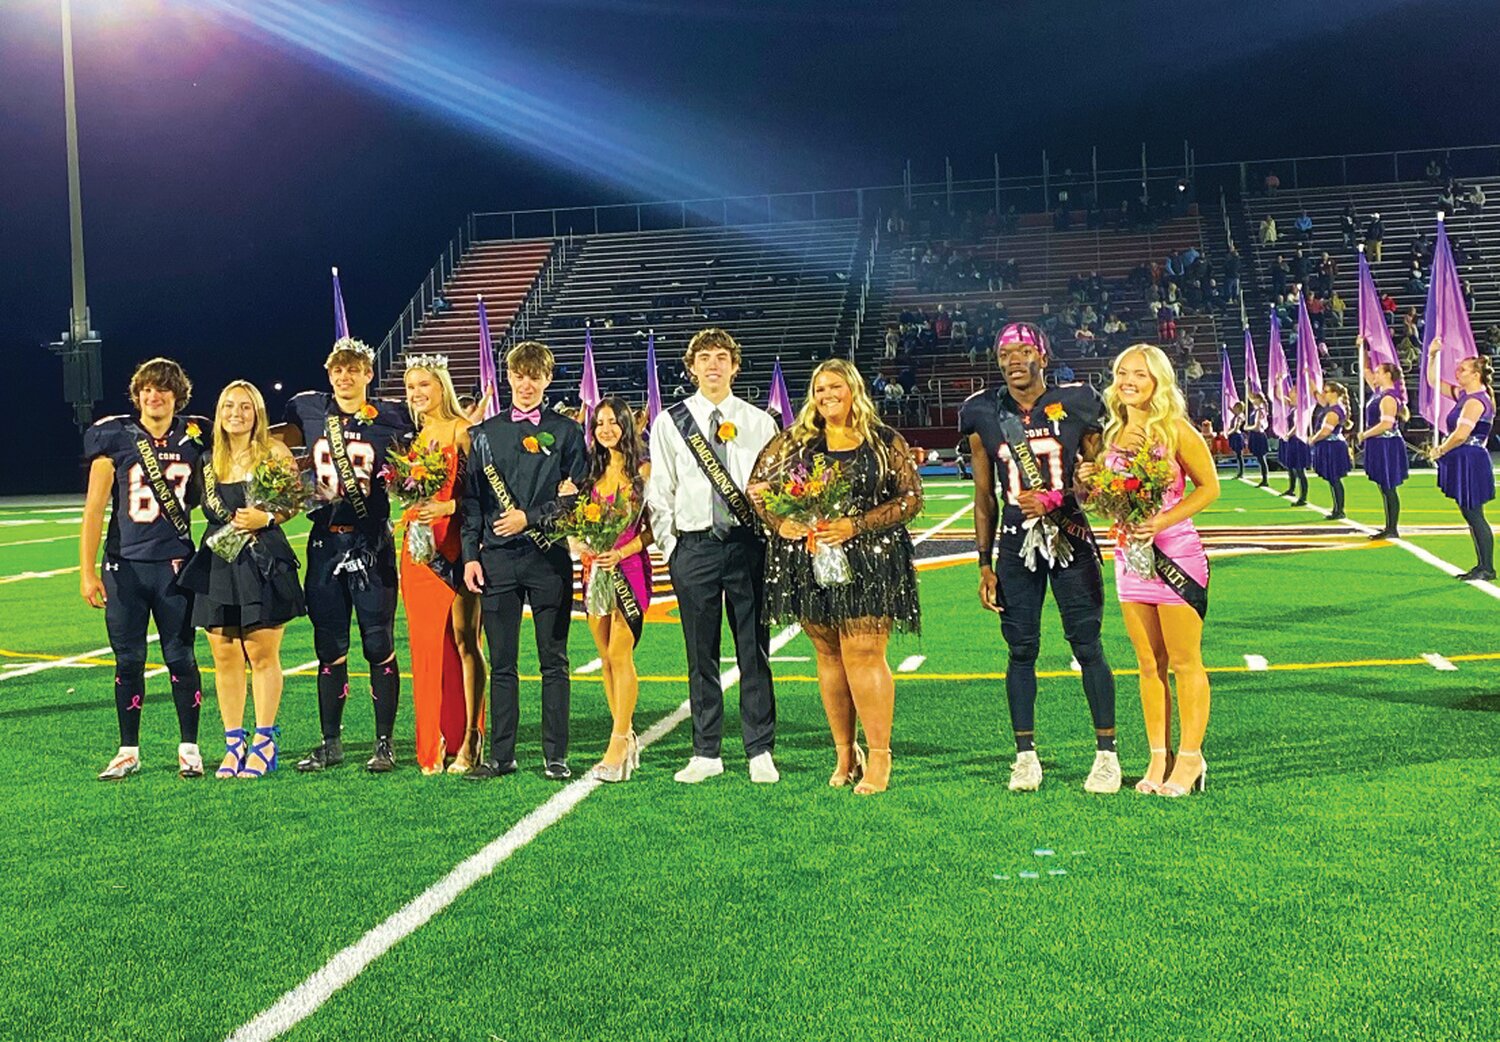 During halftime of Pennsbury High School’s Friday night homecoming football game, the school recognized its 2023-24 homecoming court. The couples, from left, were Taylor Lewis and Toby Kubitsky; Brynne Magee and Charles Wisor; Samantha Centofante and Evan Soriano; Hayden DiFranchi and Jack Elmer; Grace Kean and Noah Rice.